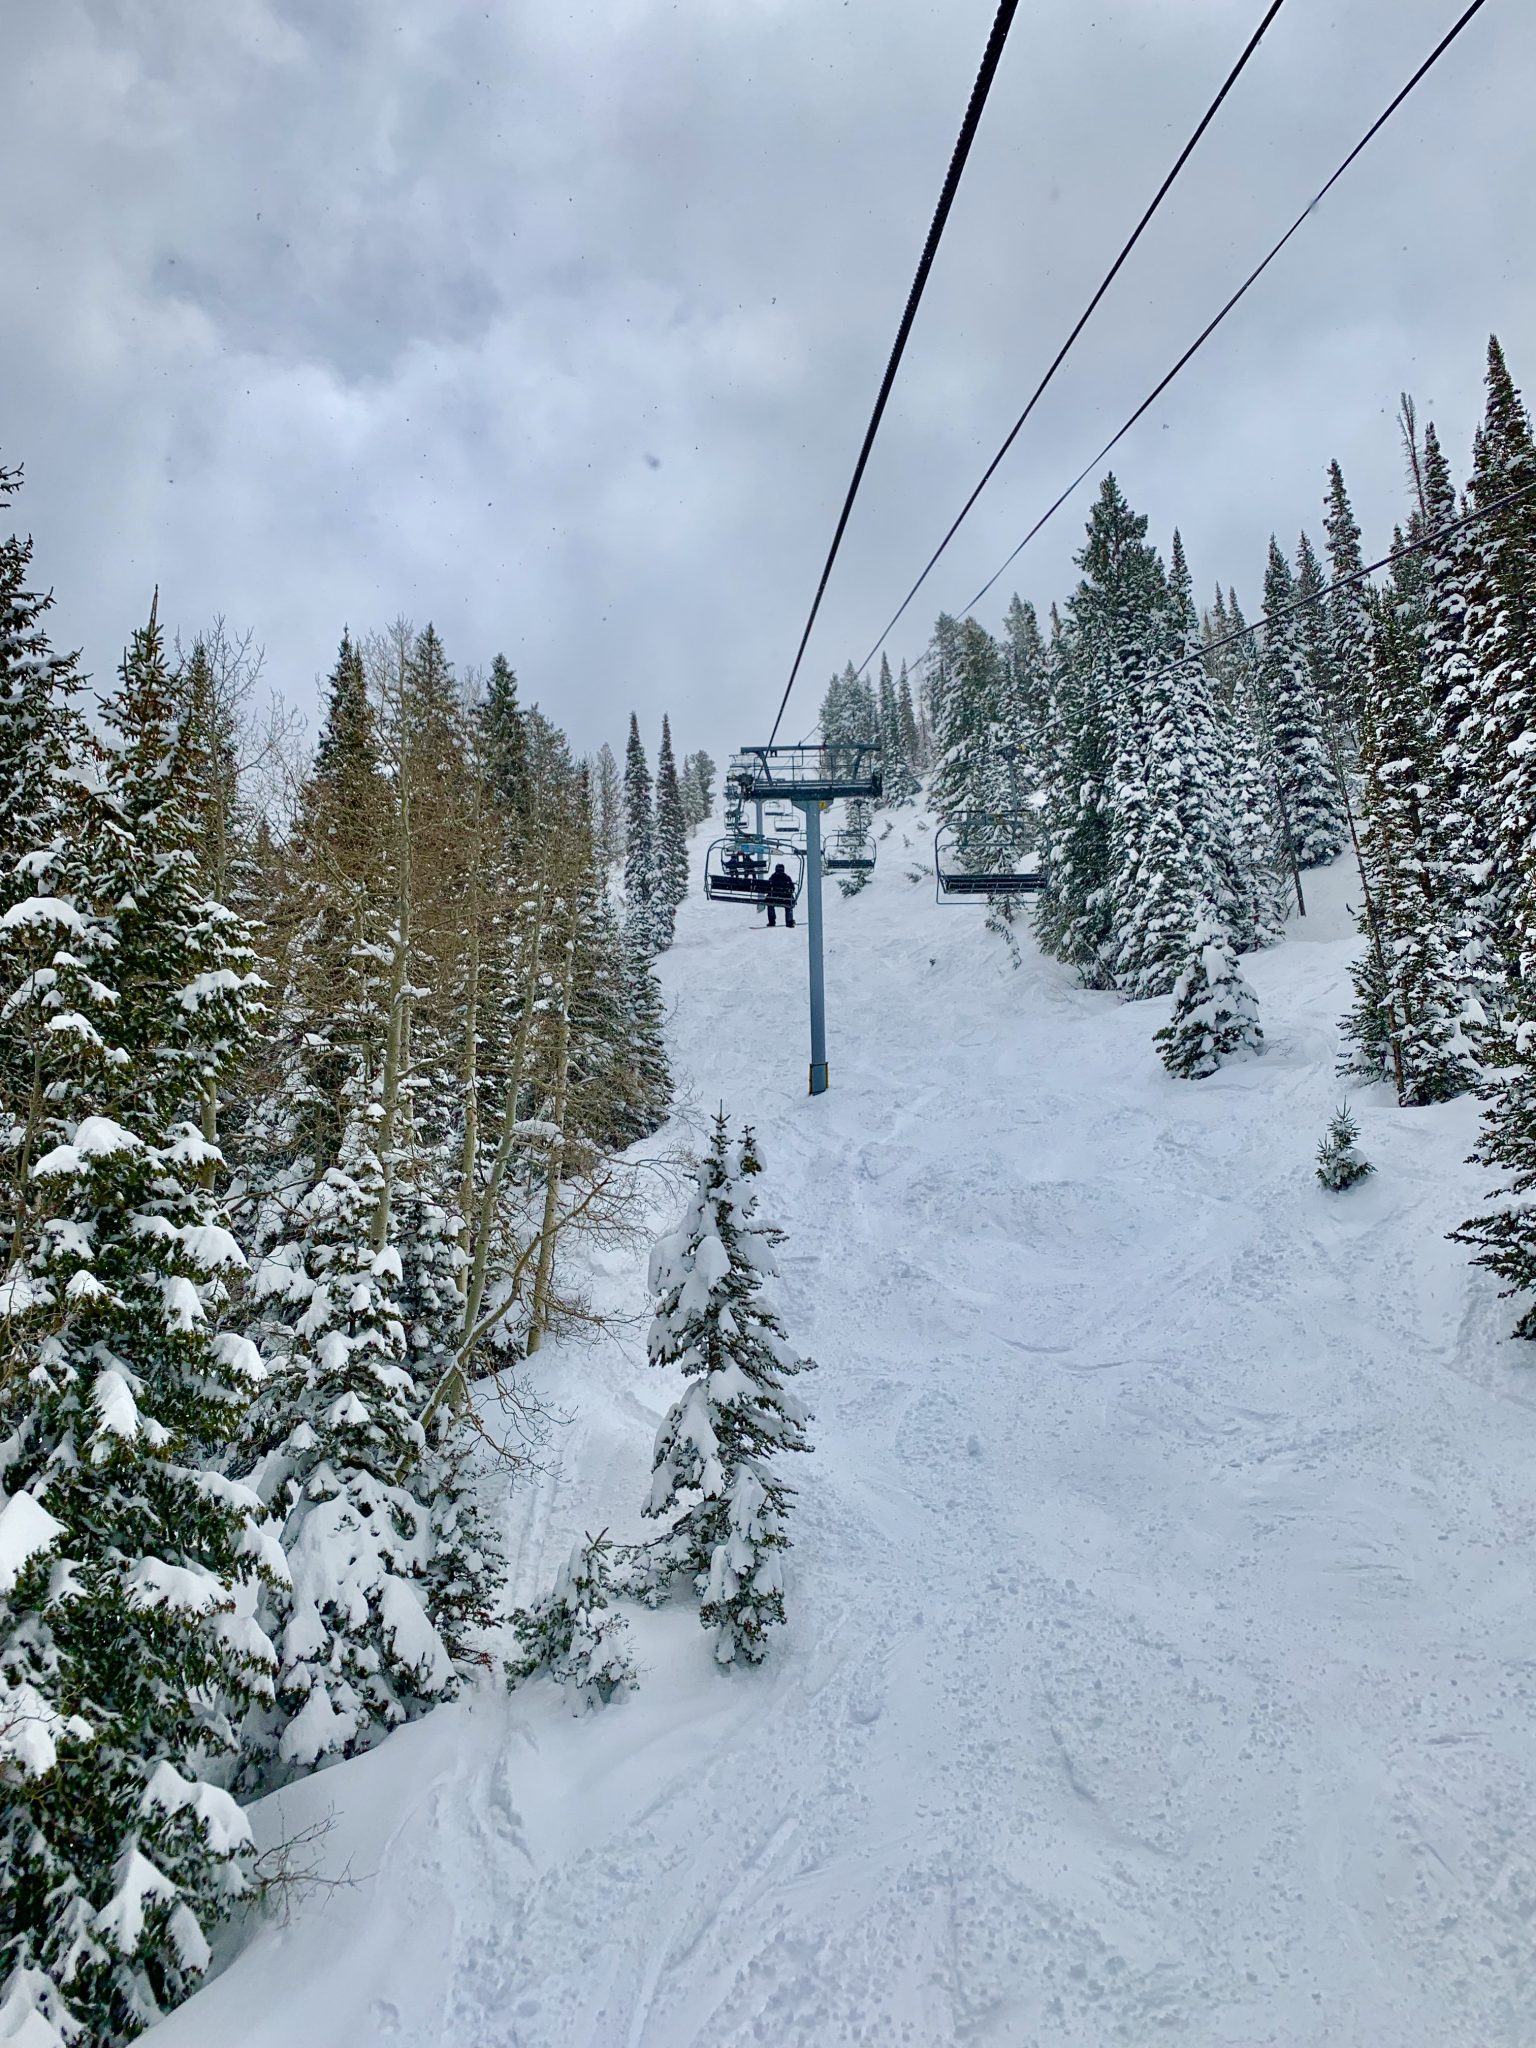 Spring skiing at Utah's Snowbird mountain still had some snow covered trees.